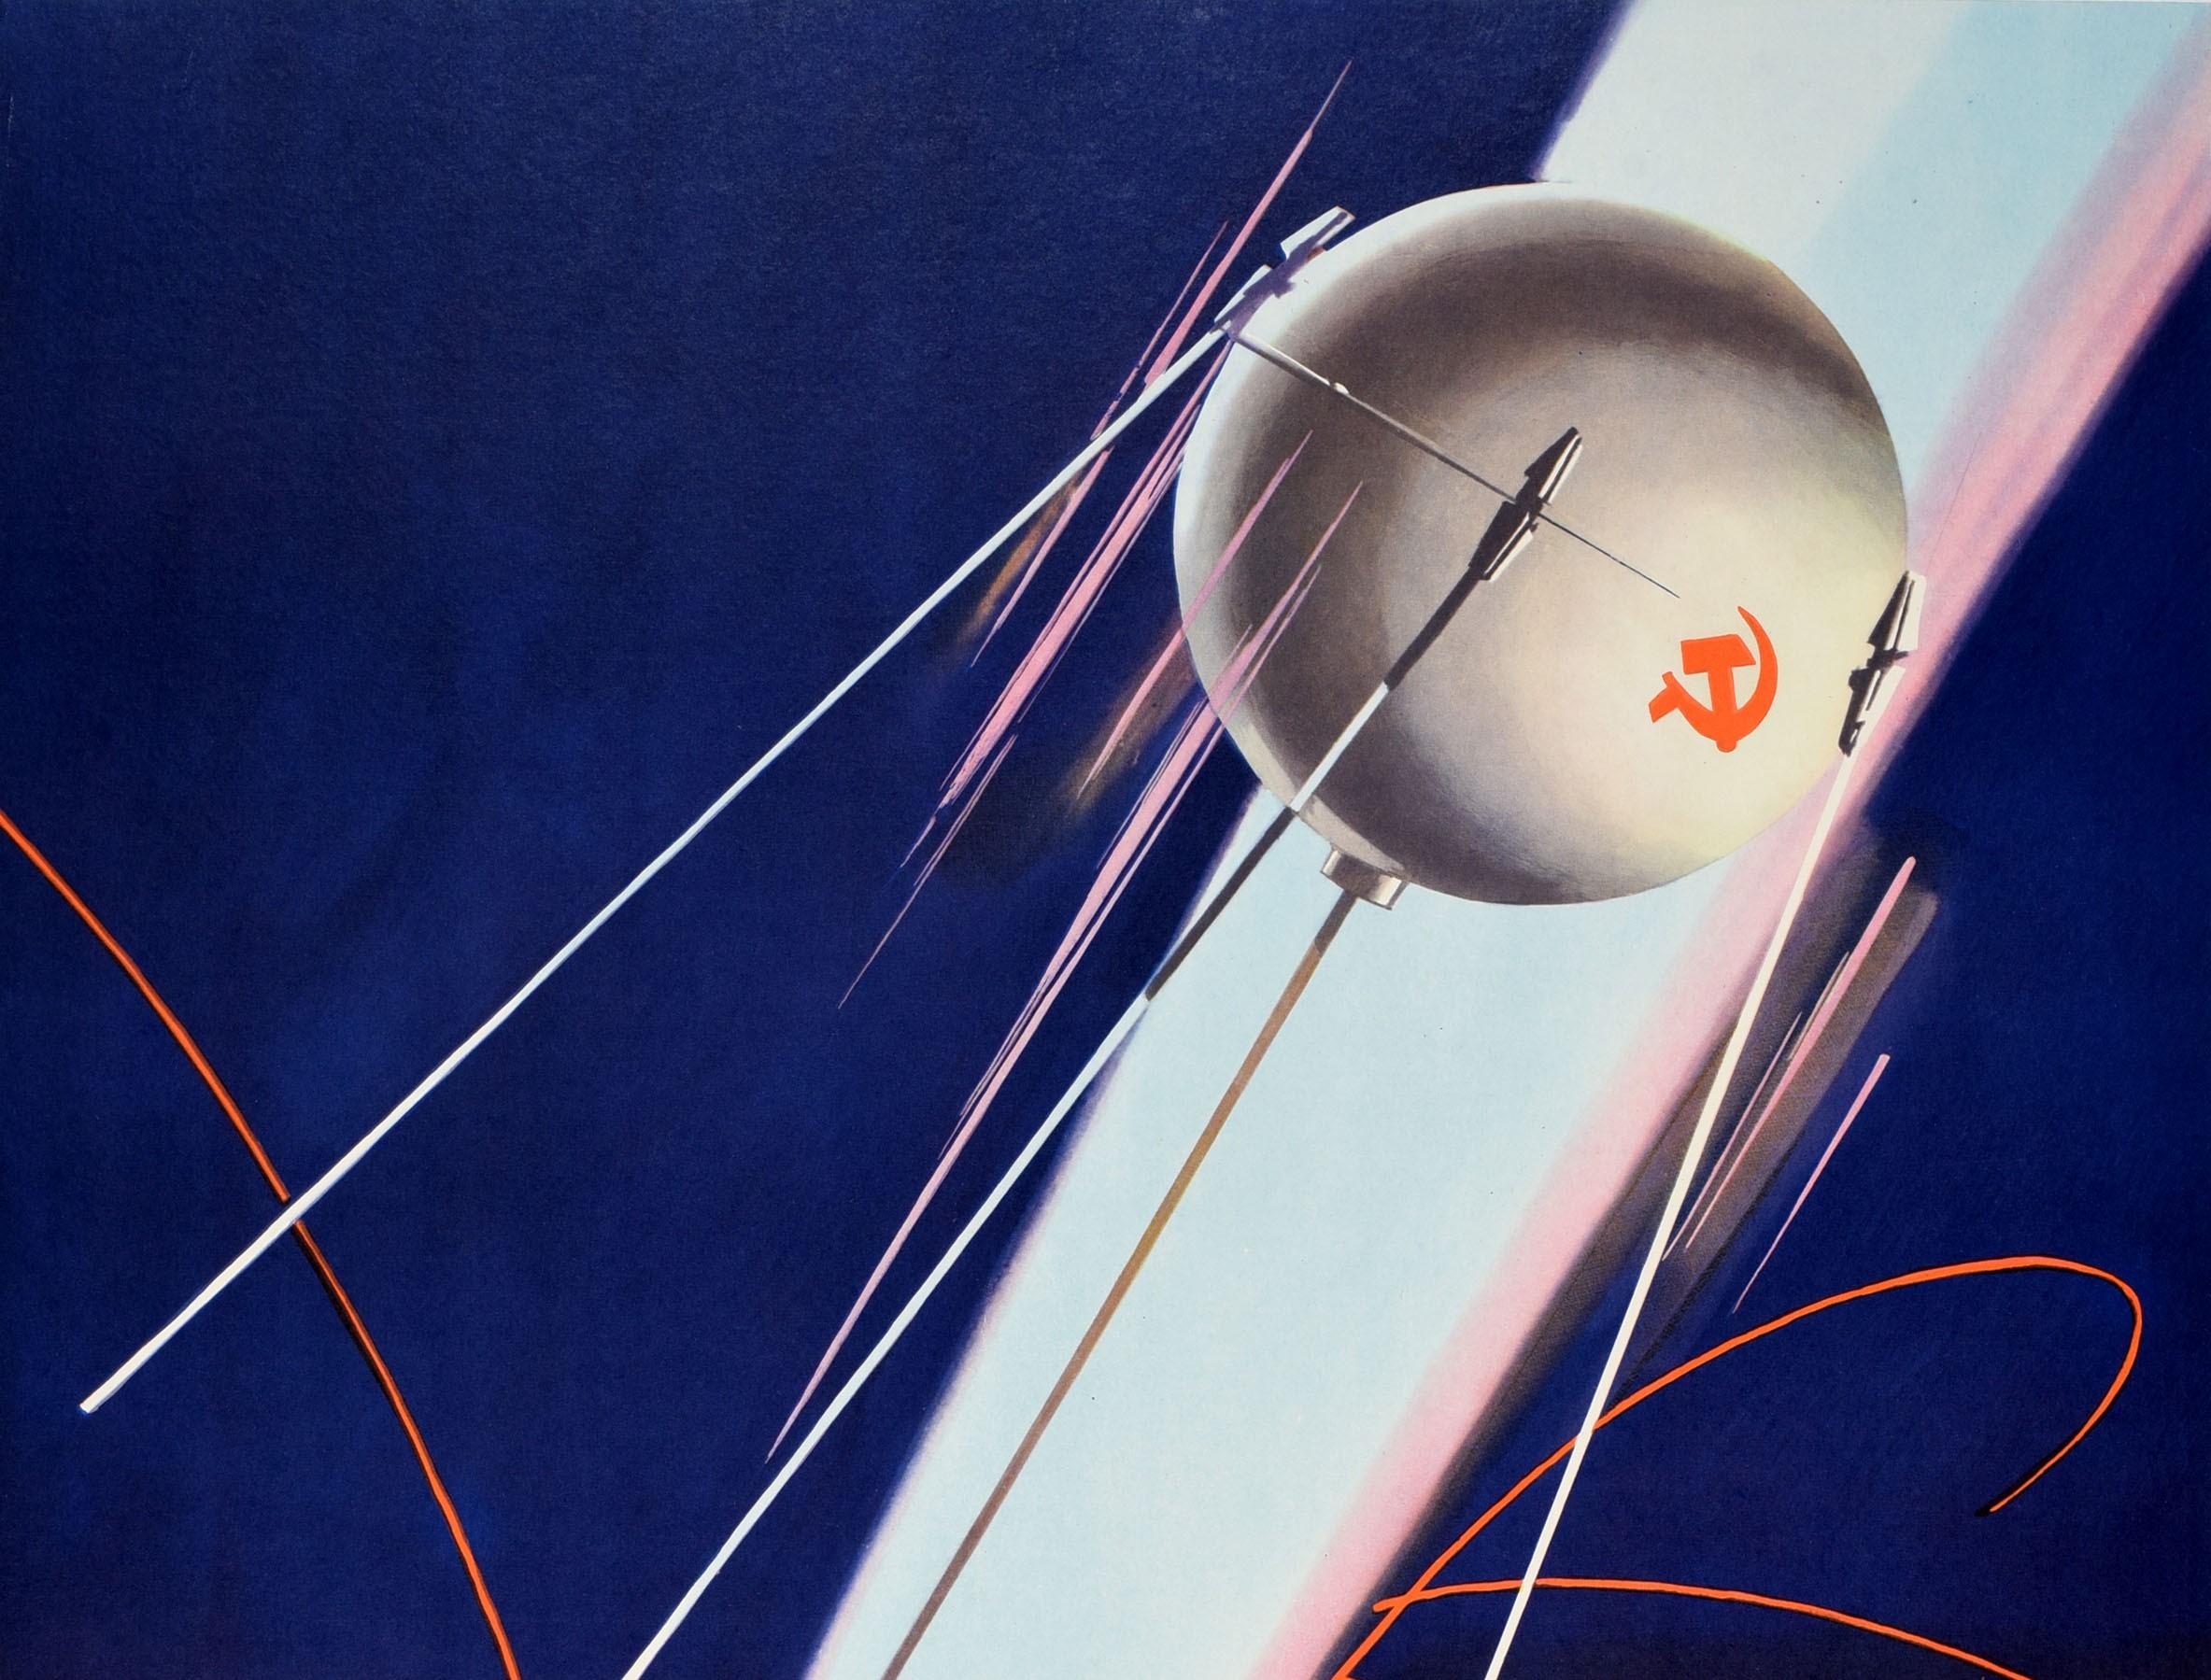 Original vintage Soviet propaganda poster - The Country of the October Revolution is the Birthplace of Cosmonautics / ?????? ??????? - ?????? ????????????. Dynamic design of the battleship cruiser Aurora with a sputnik satellite marked with a red